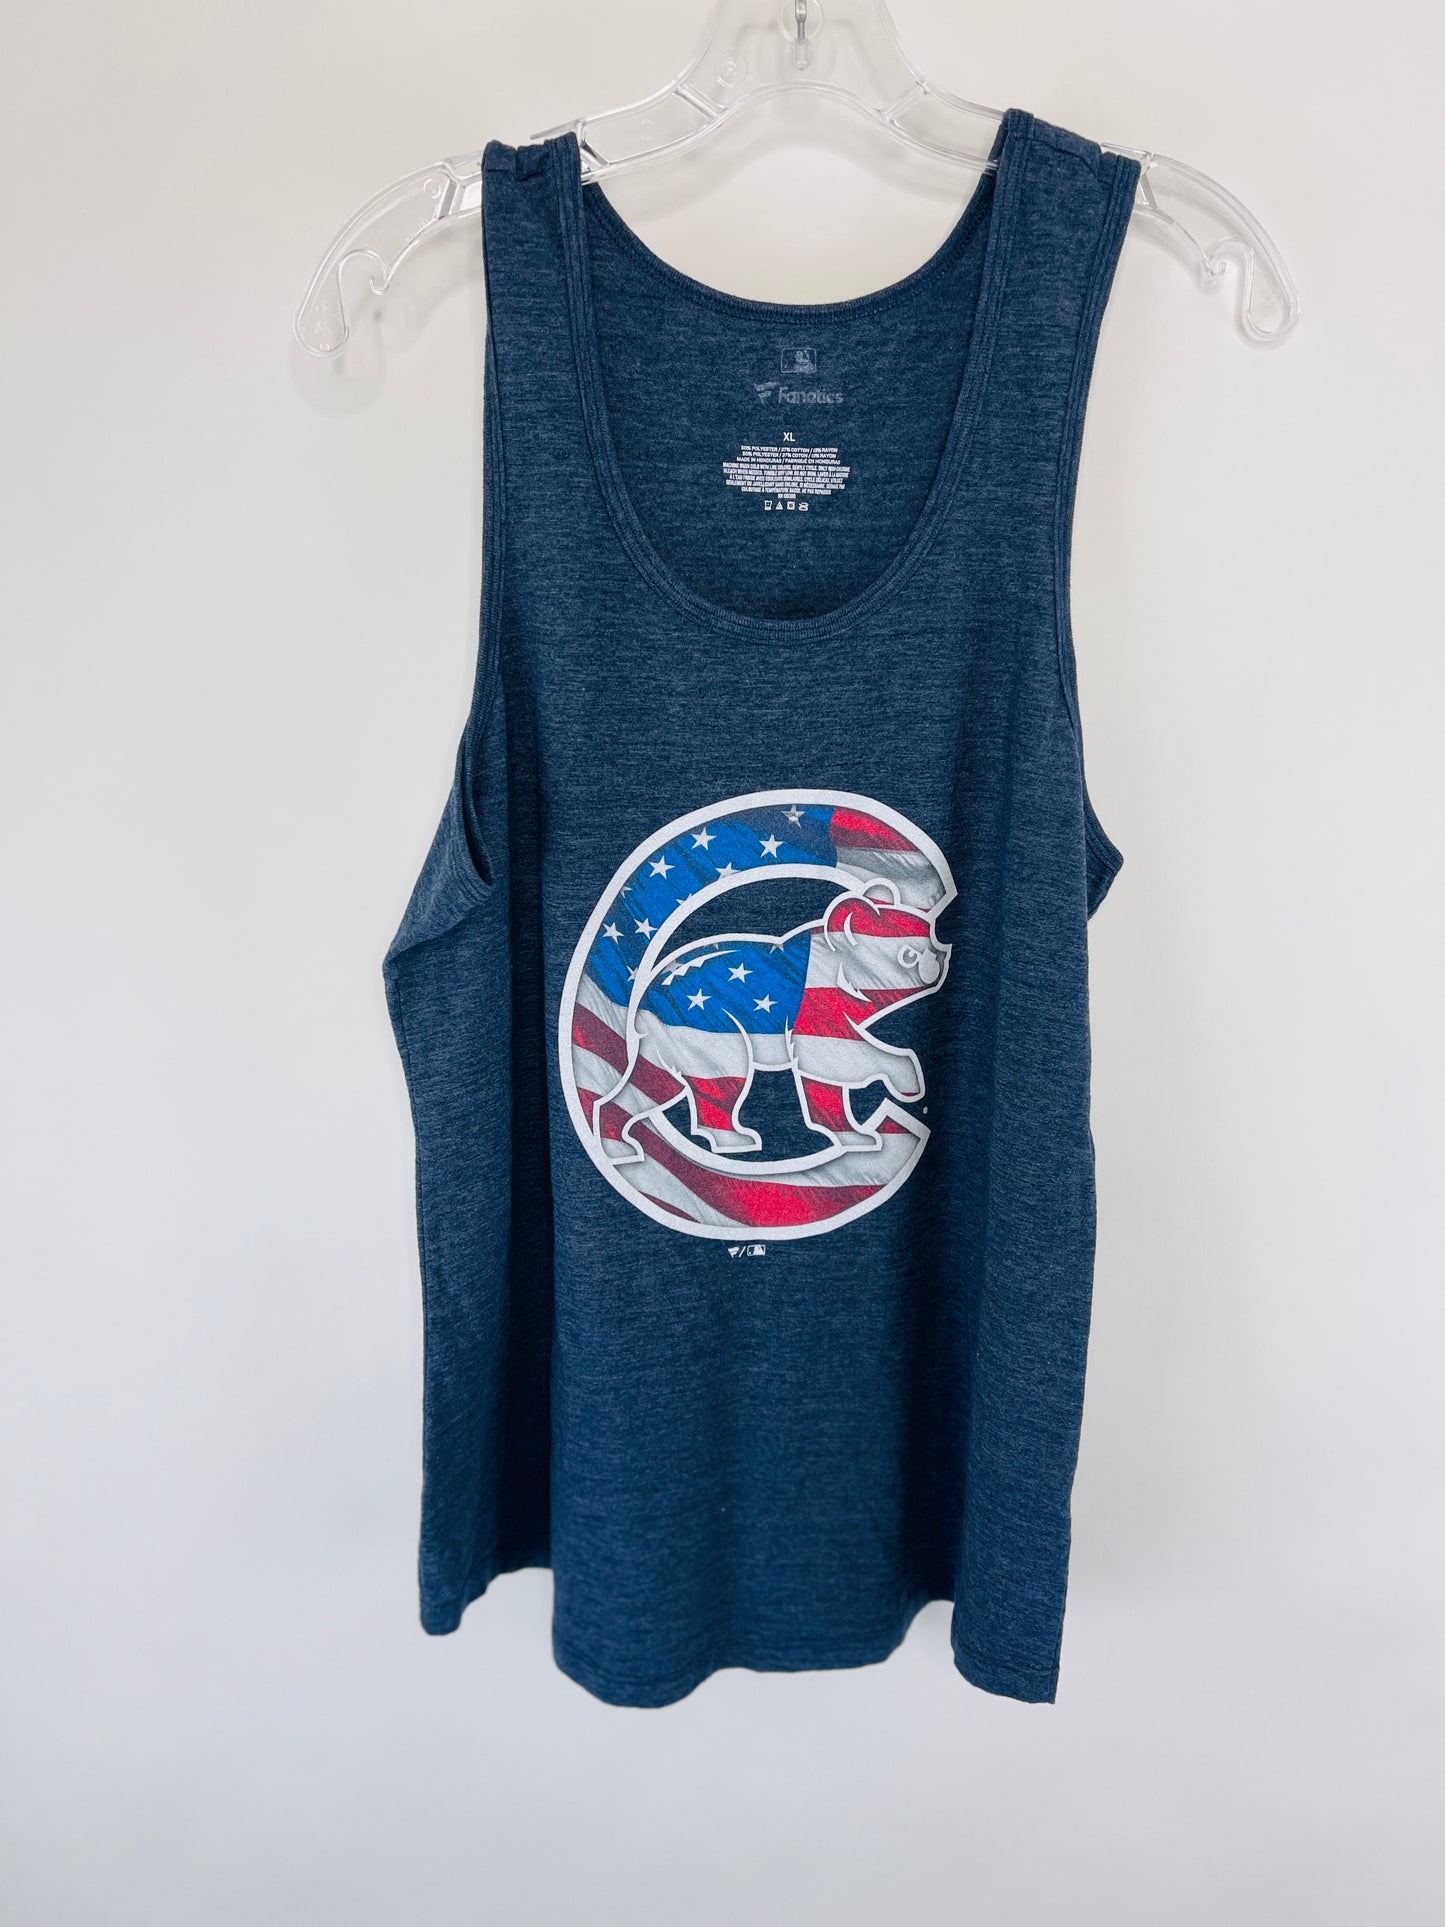 Chicago Cubs "Rizzo 44" Navy Blue Patriotic Tank - XL